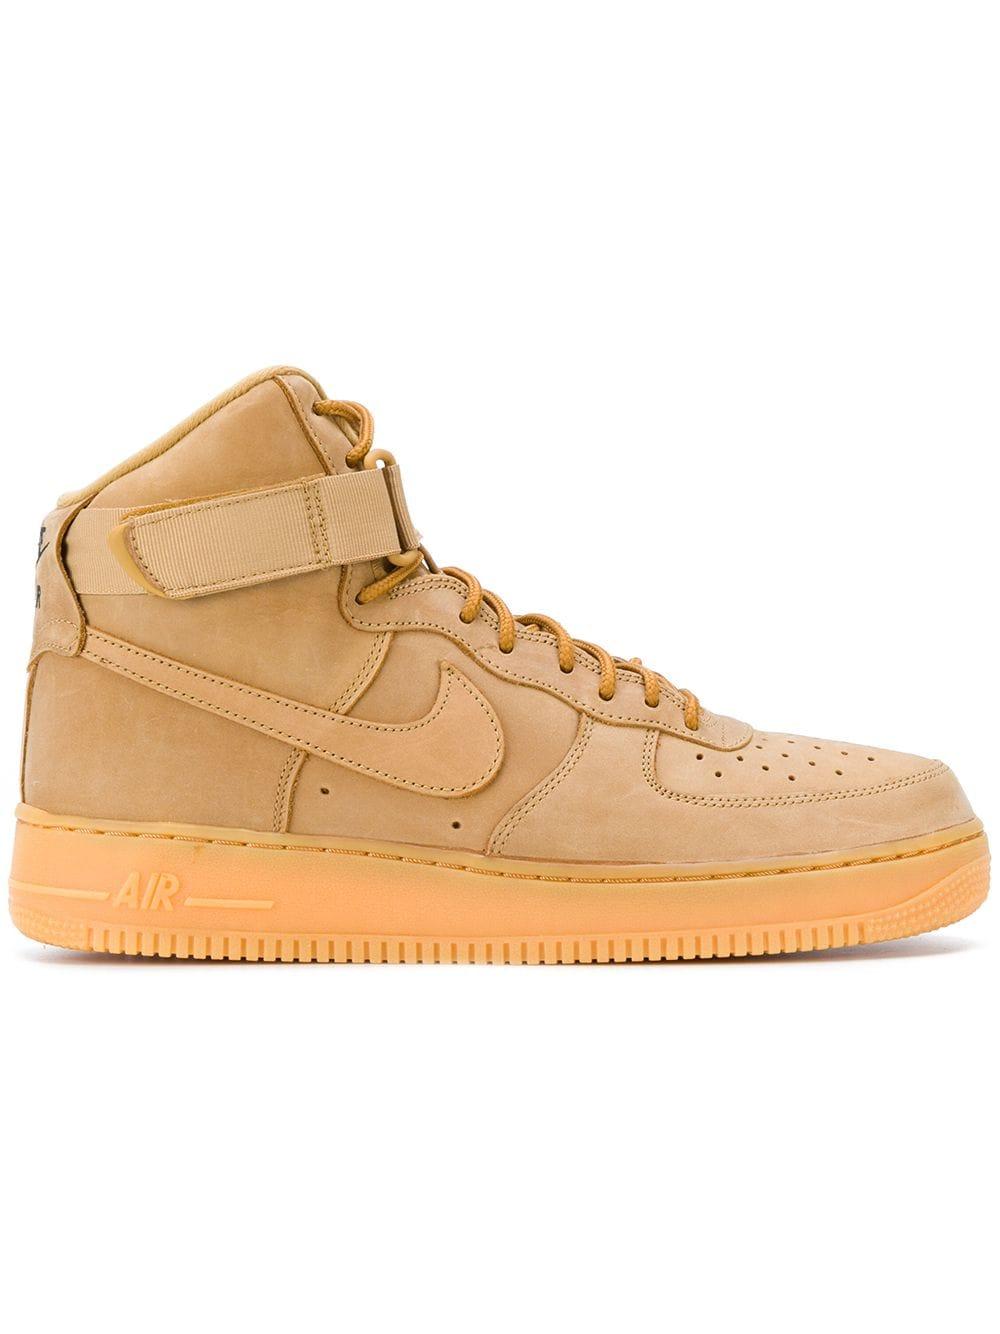 Nike Air Force 1 High in Natural for Men